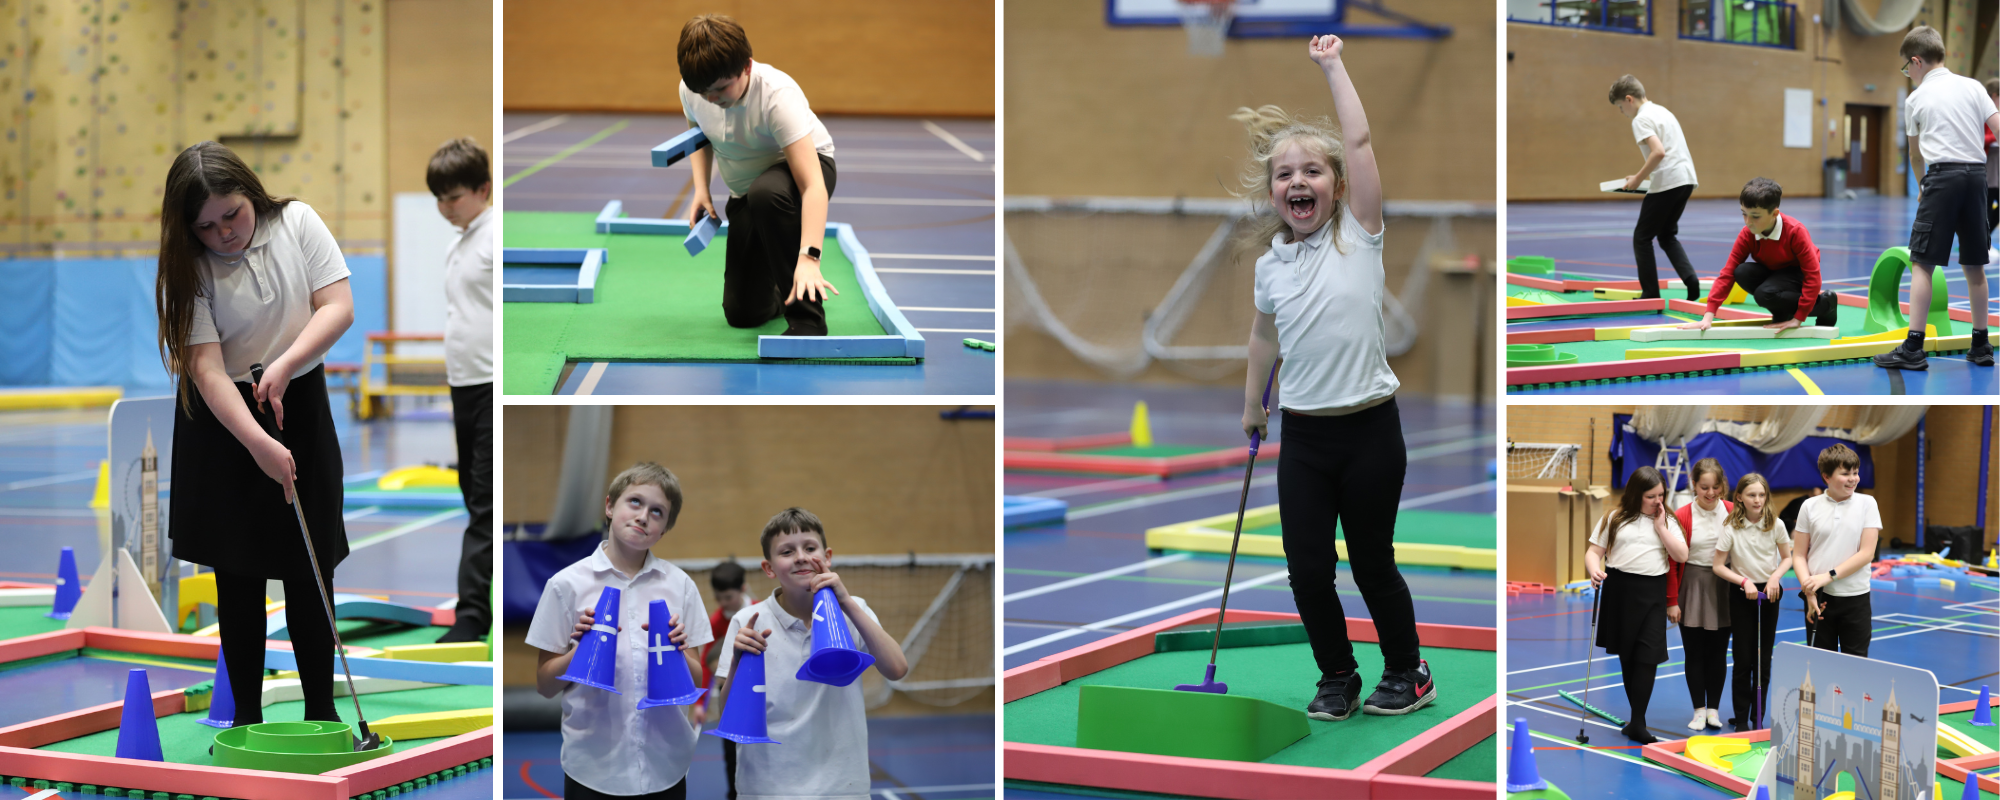 Mini golf encourages participation in PE lessons